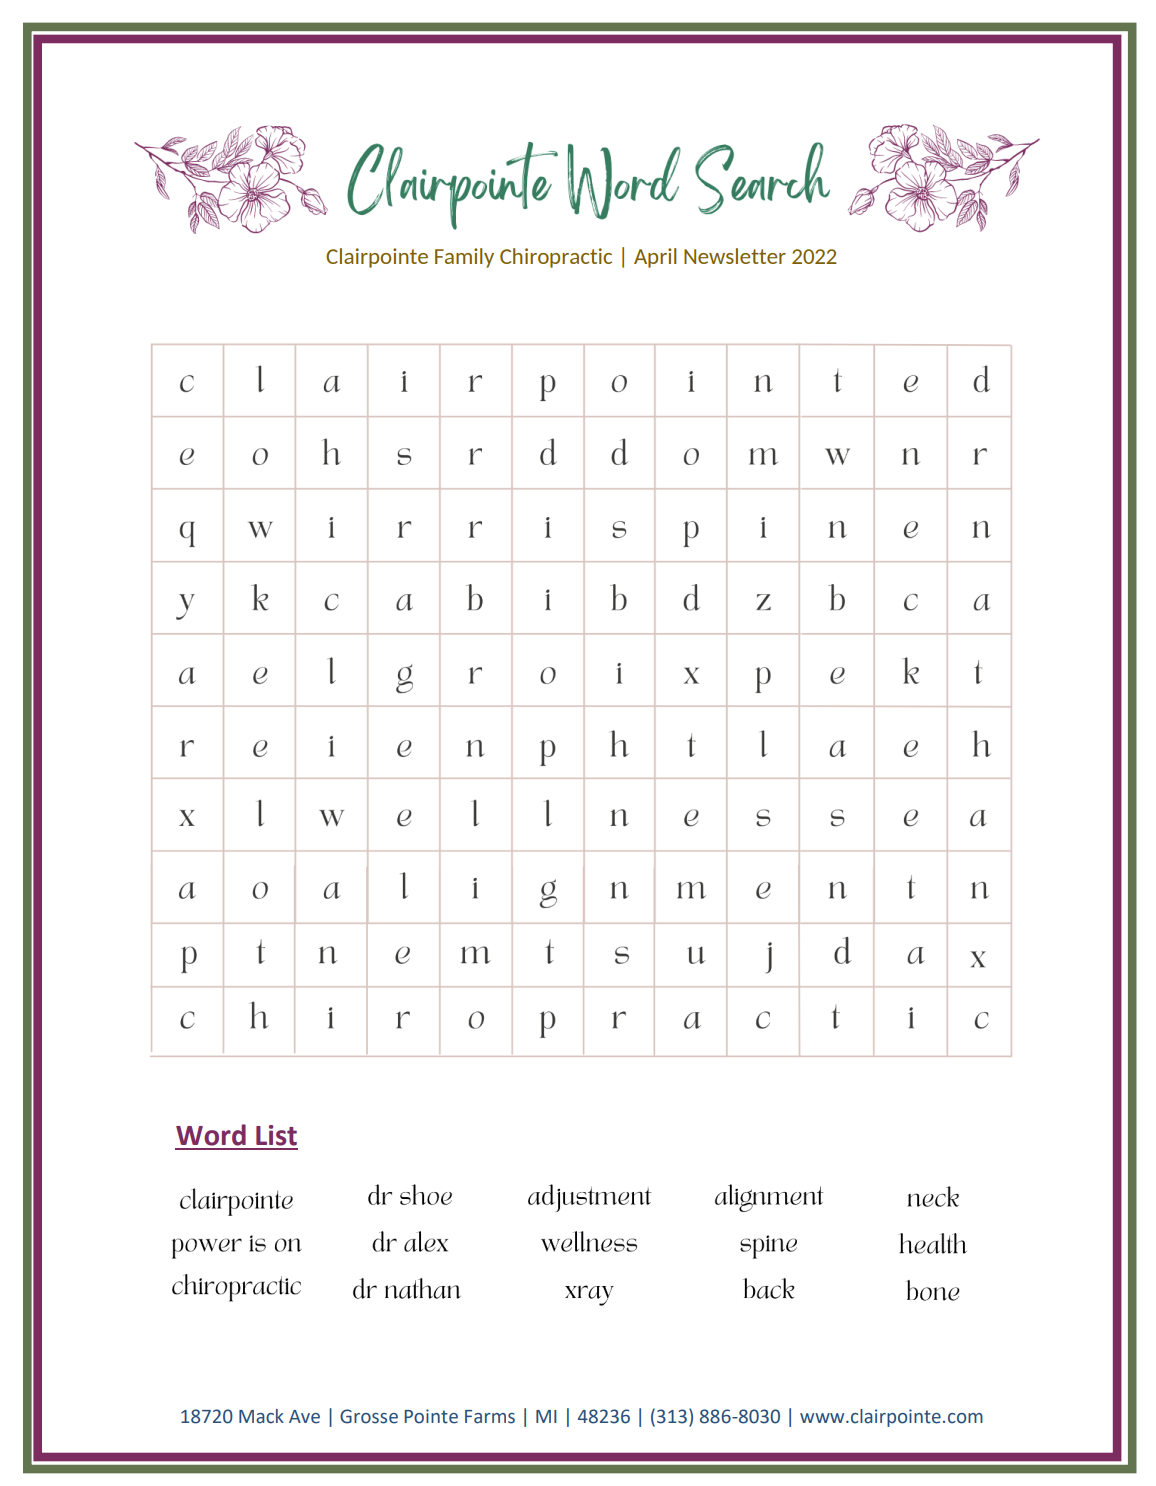 Clairpointe Word Search 